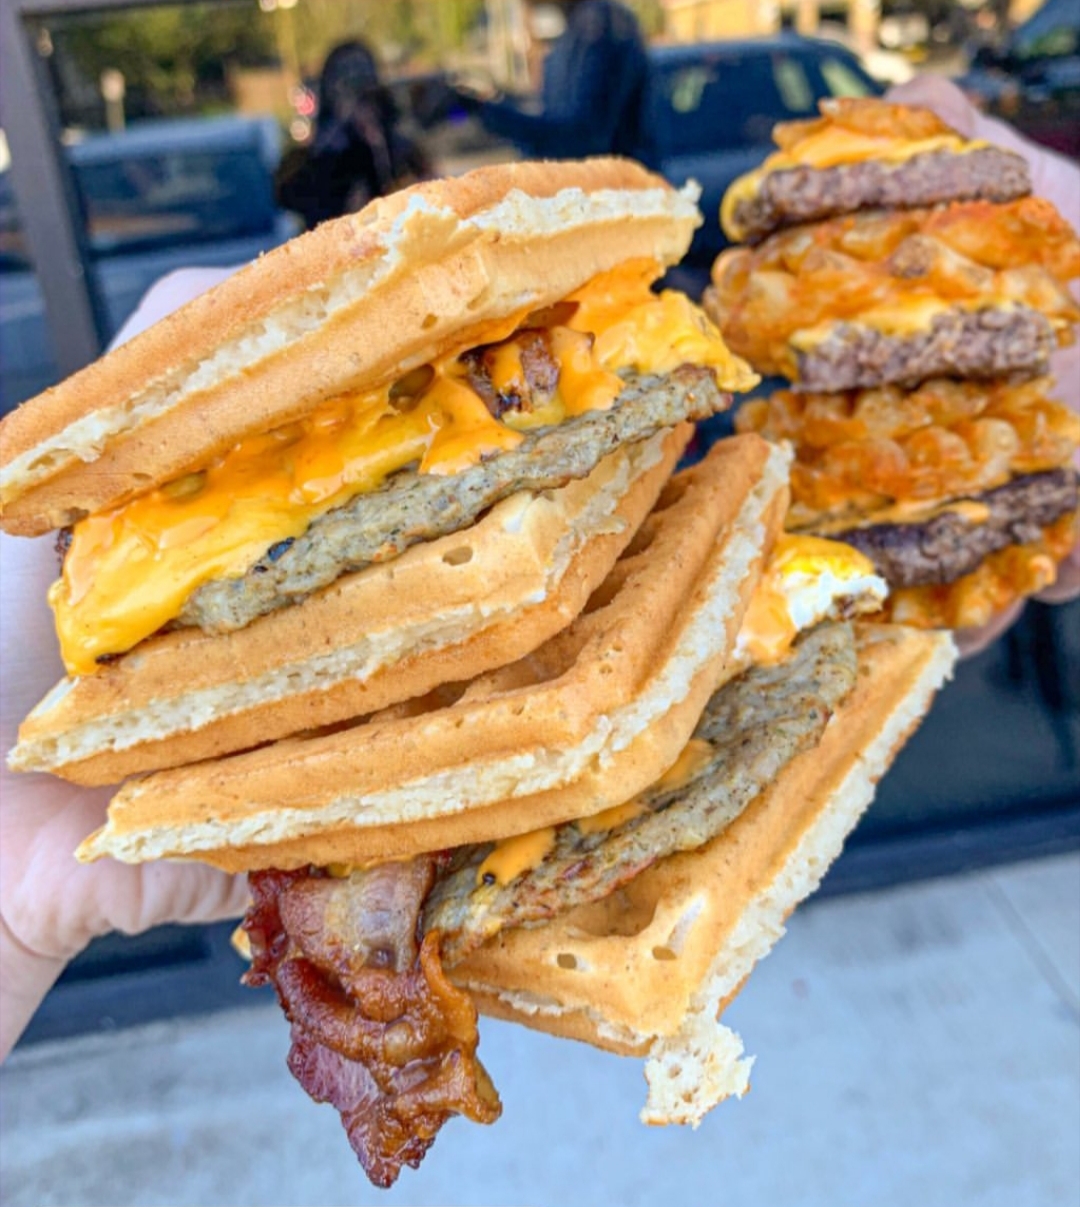 Waffle sandwiches at The Waffle Bus